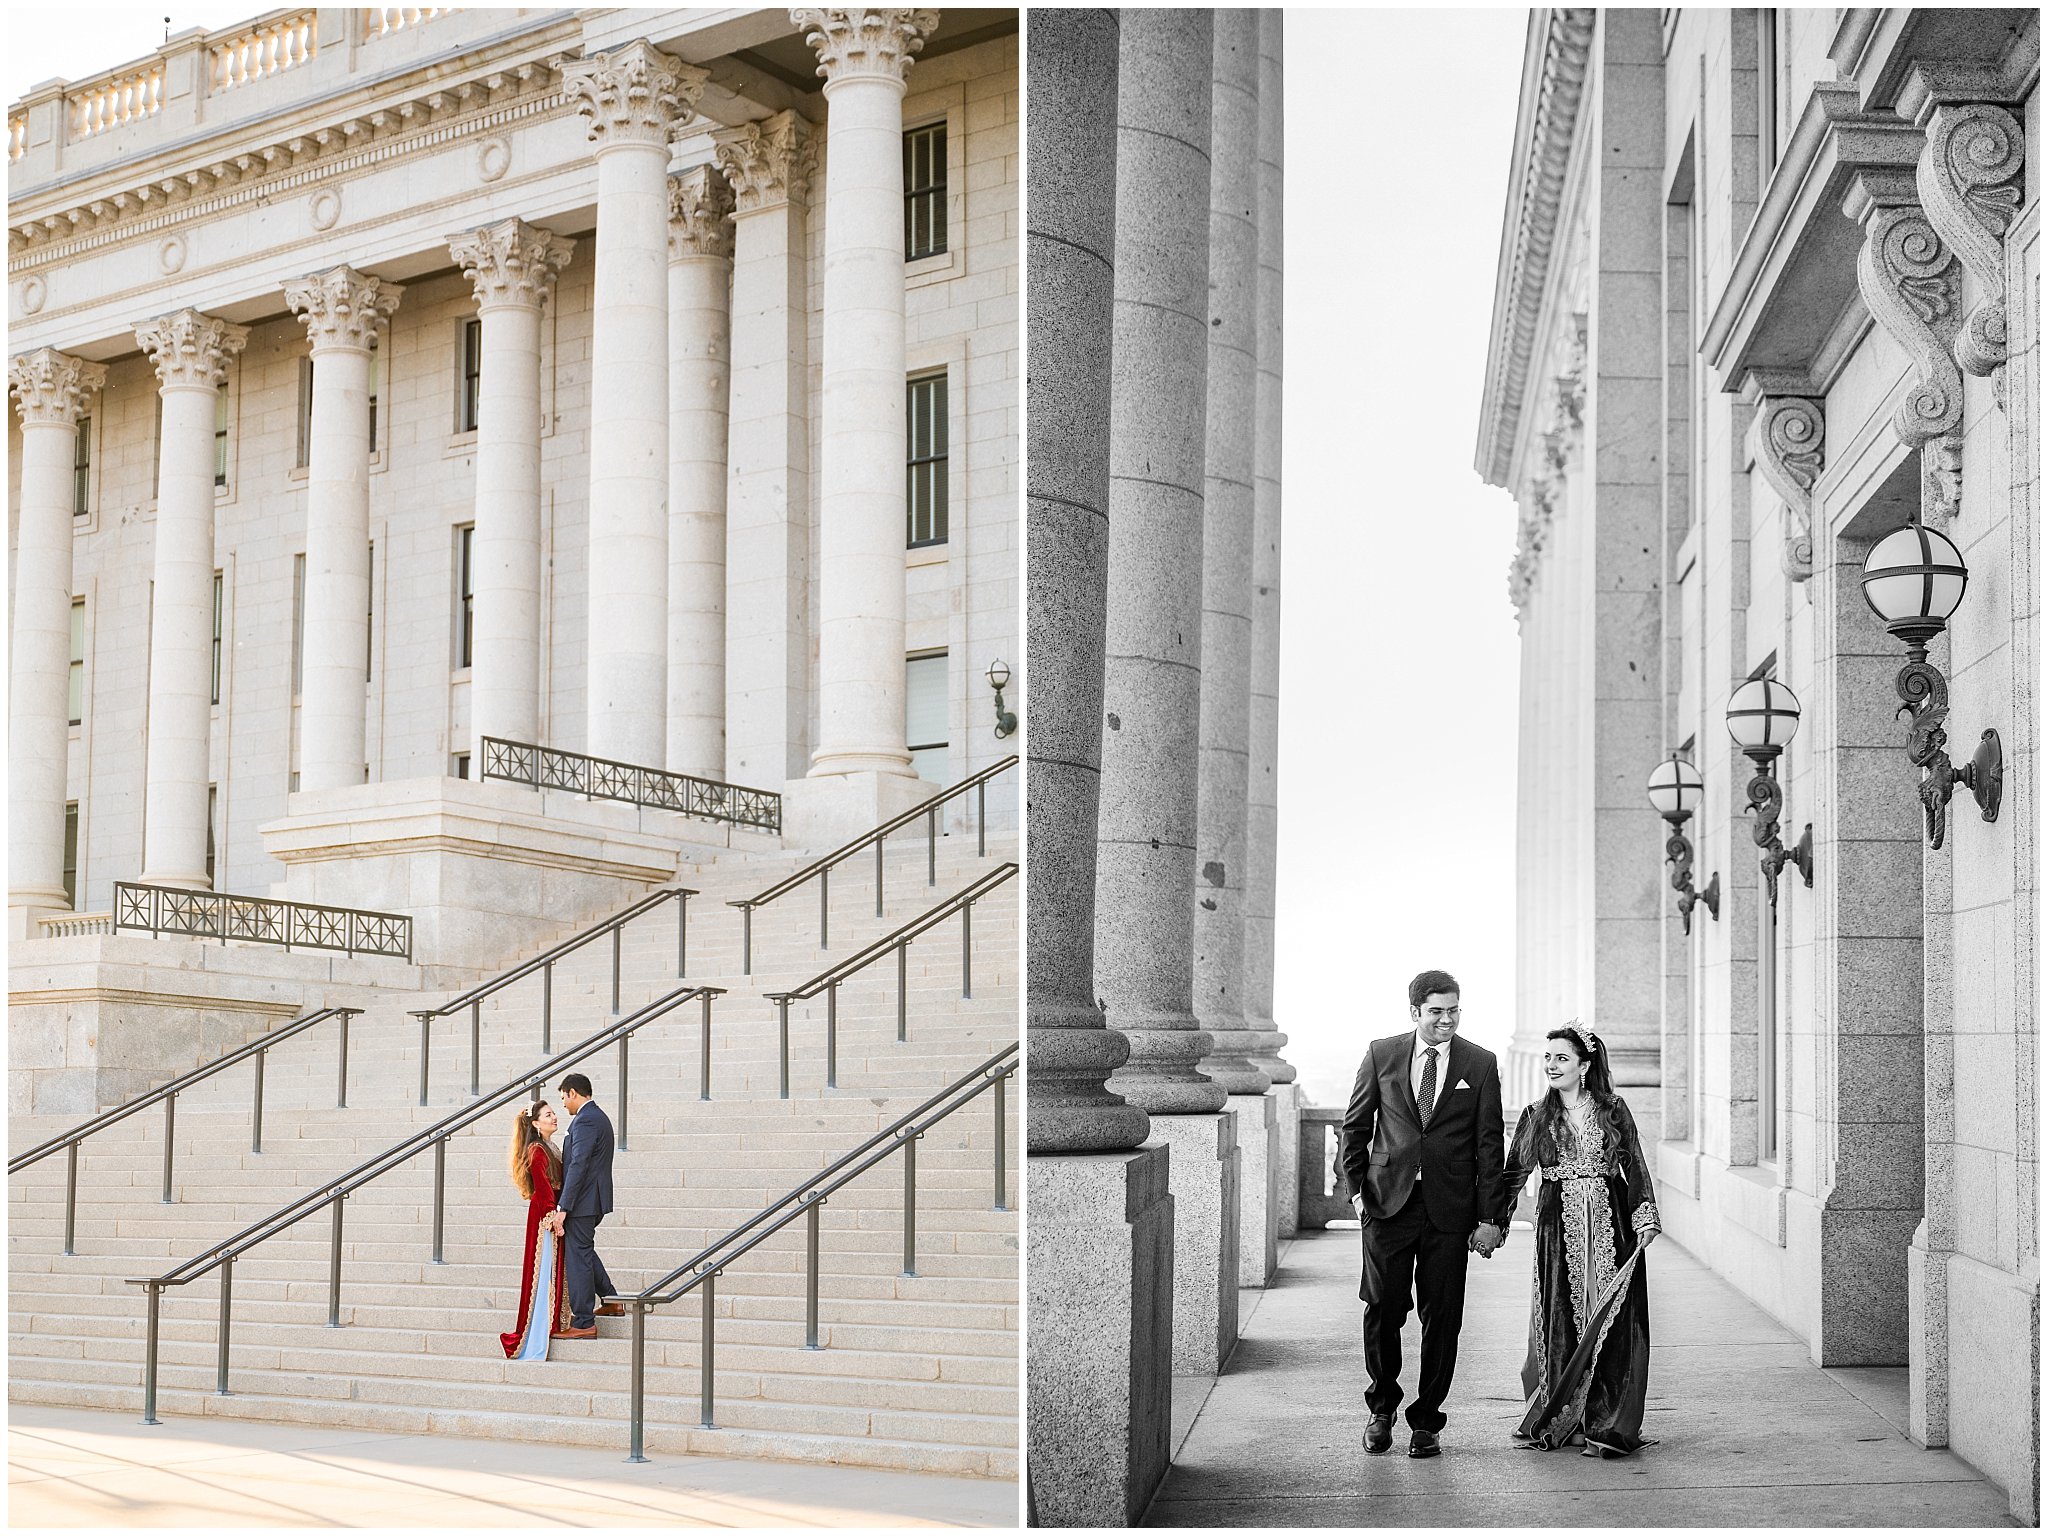 Couple at the Utah State Capitol in the summer | Moroccan-inspired Utah State Capitol sunset wedding formal session